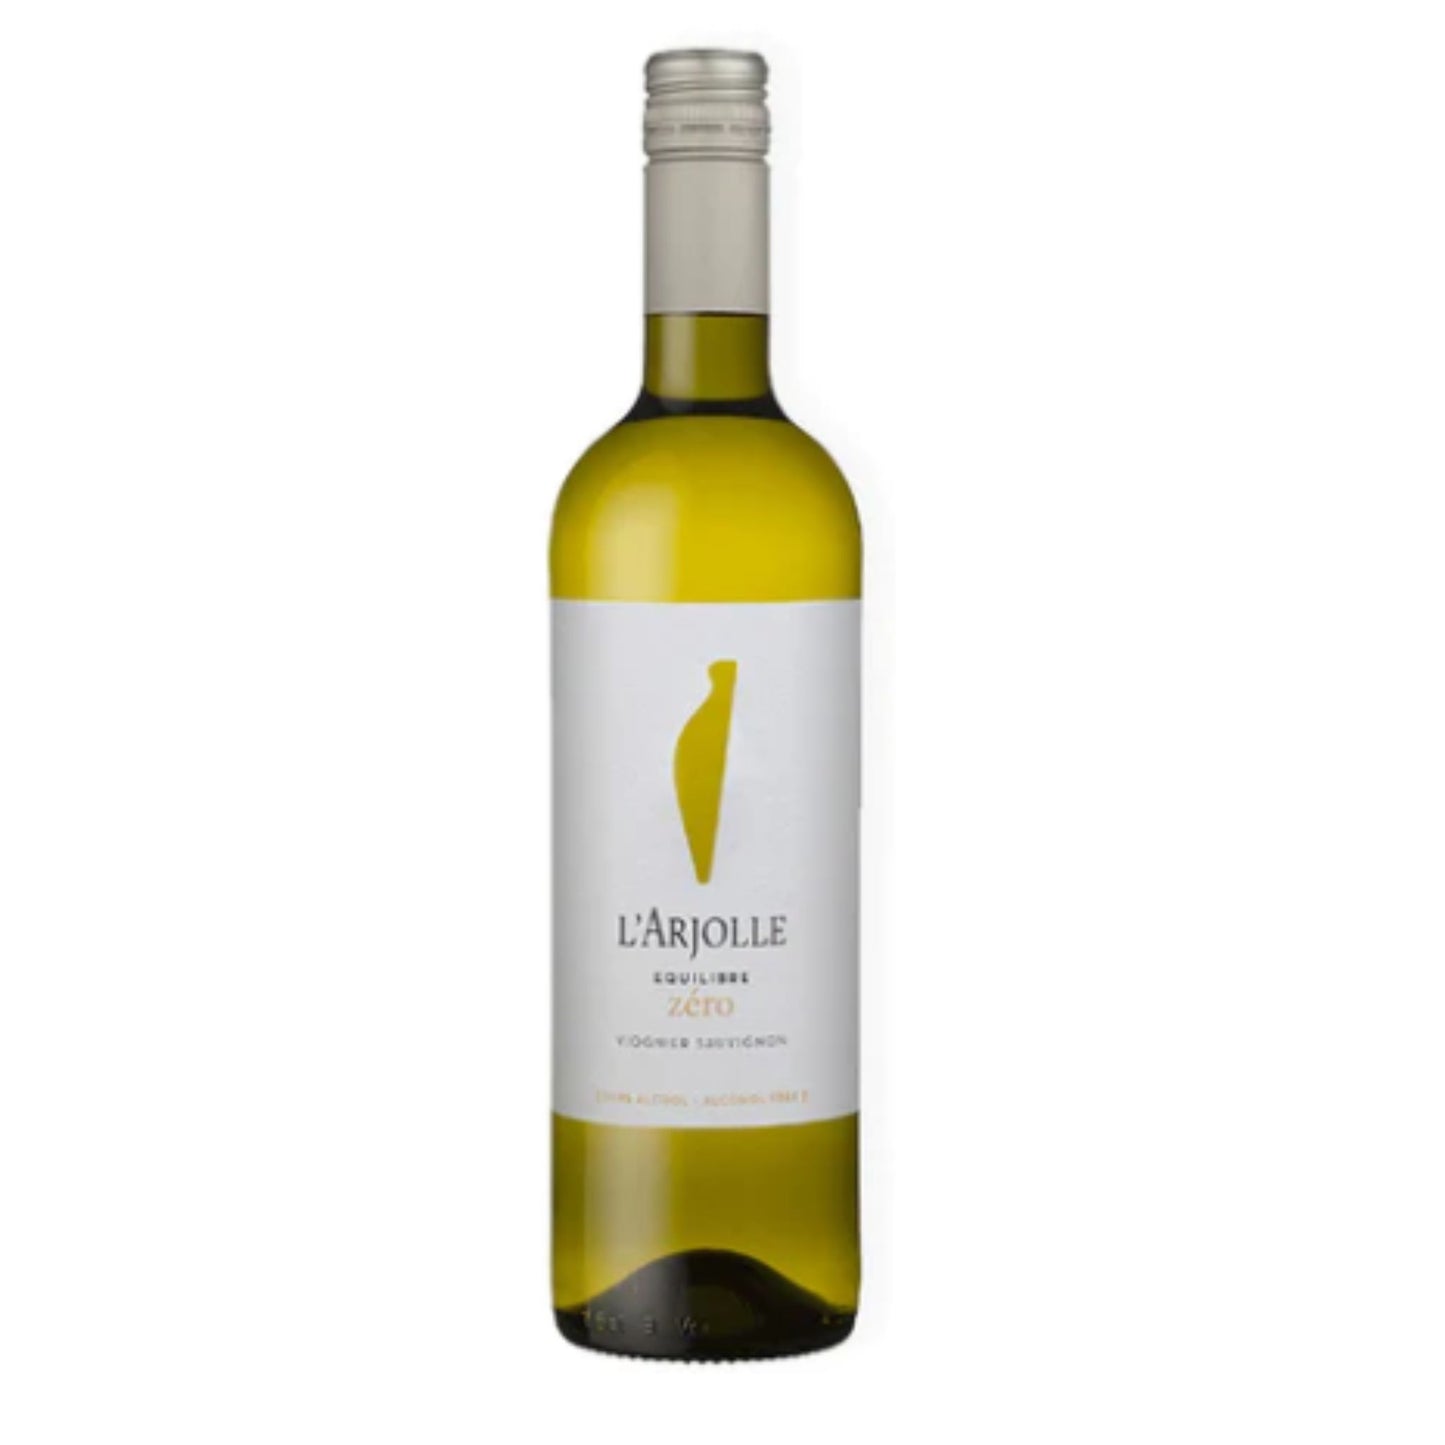 L'Arjolle Viognier Sauvignon non-alcoholic wine is available for sale at Knyota Drinks in Ottawa.